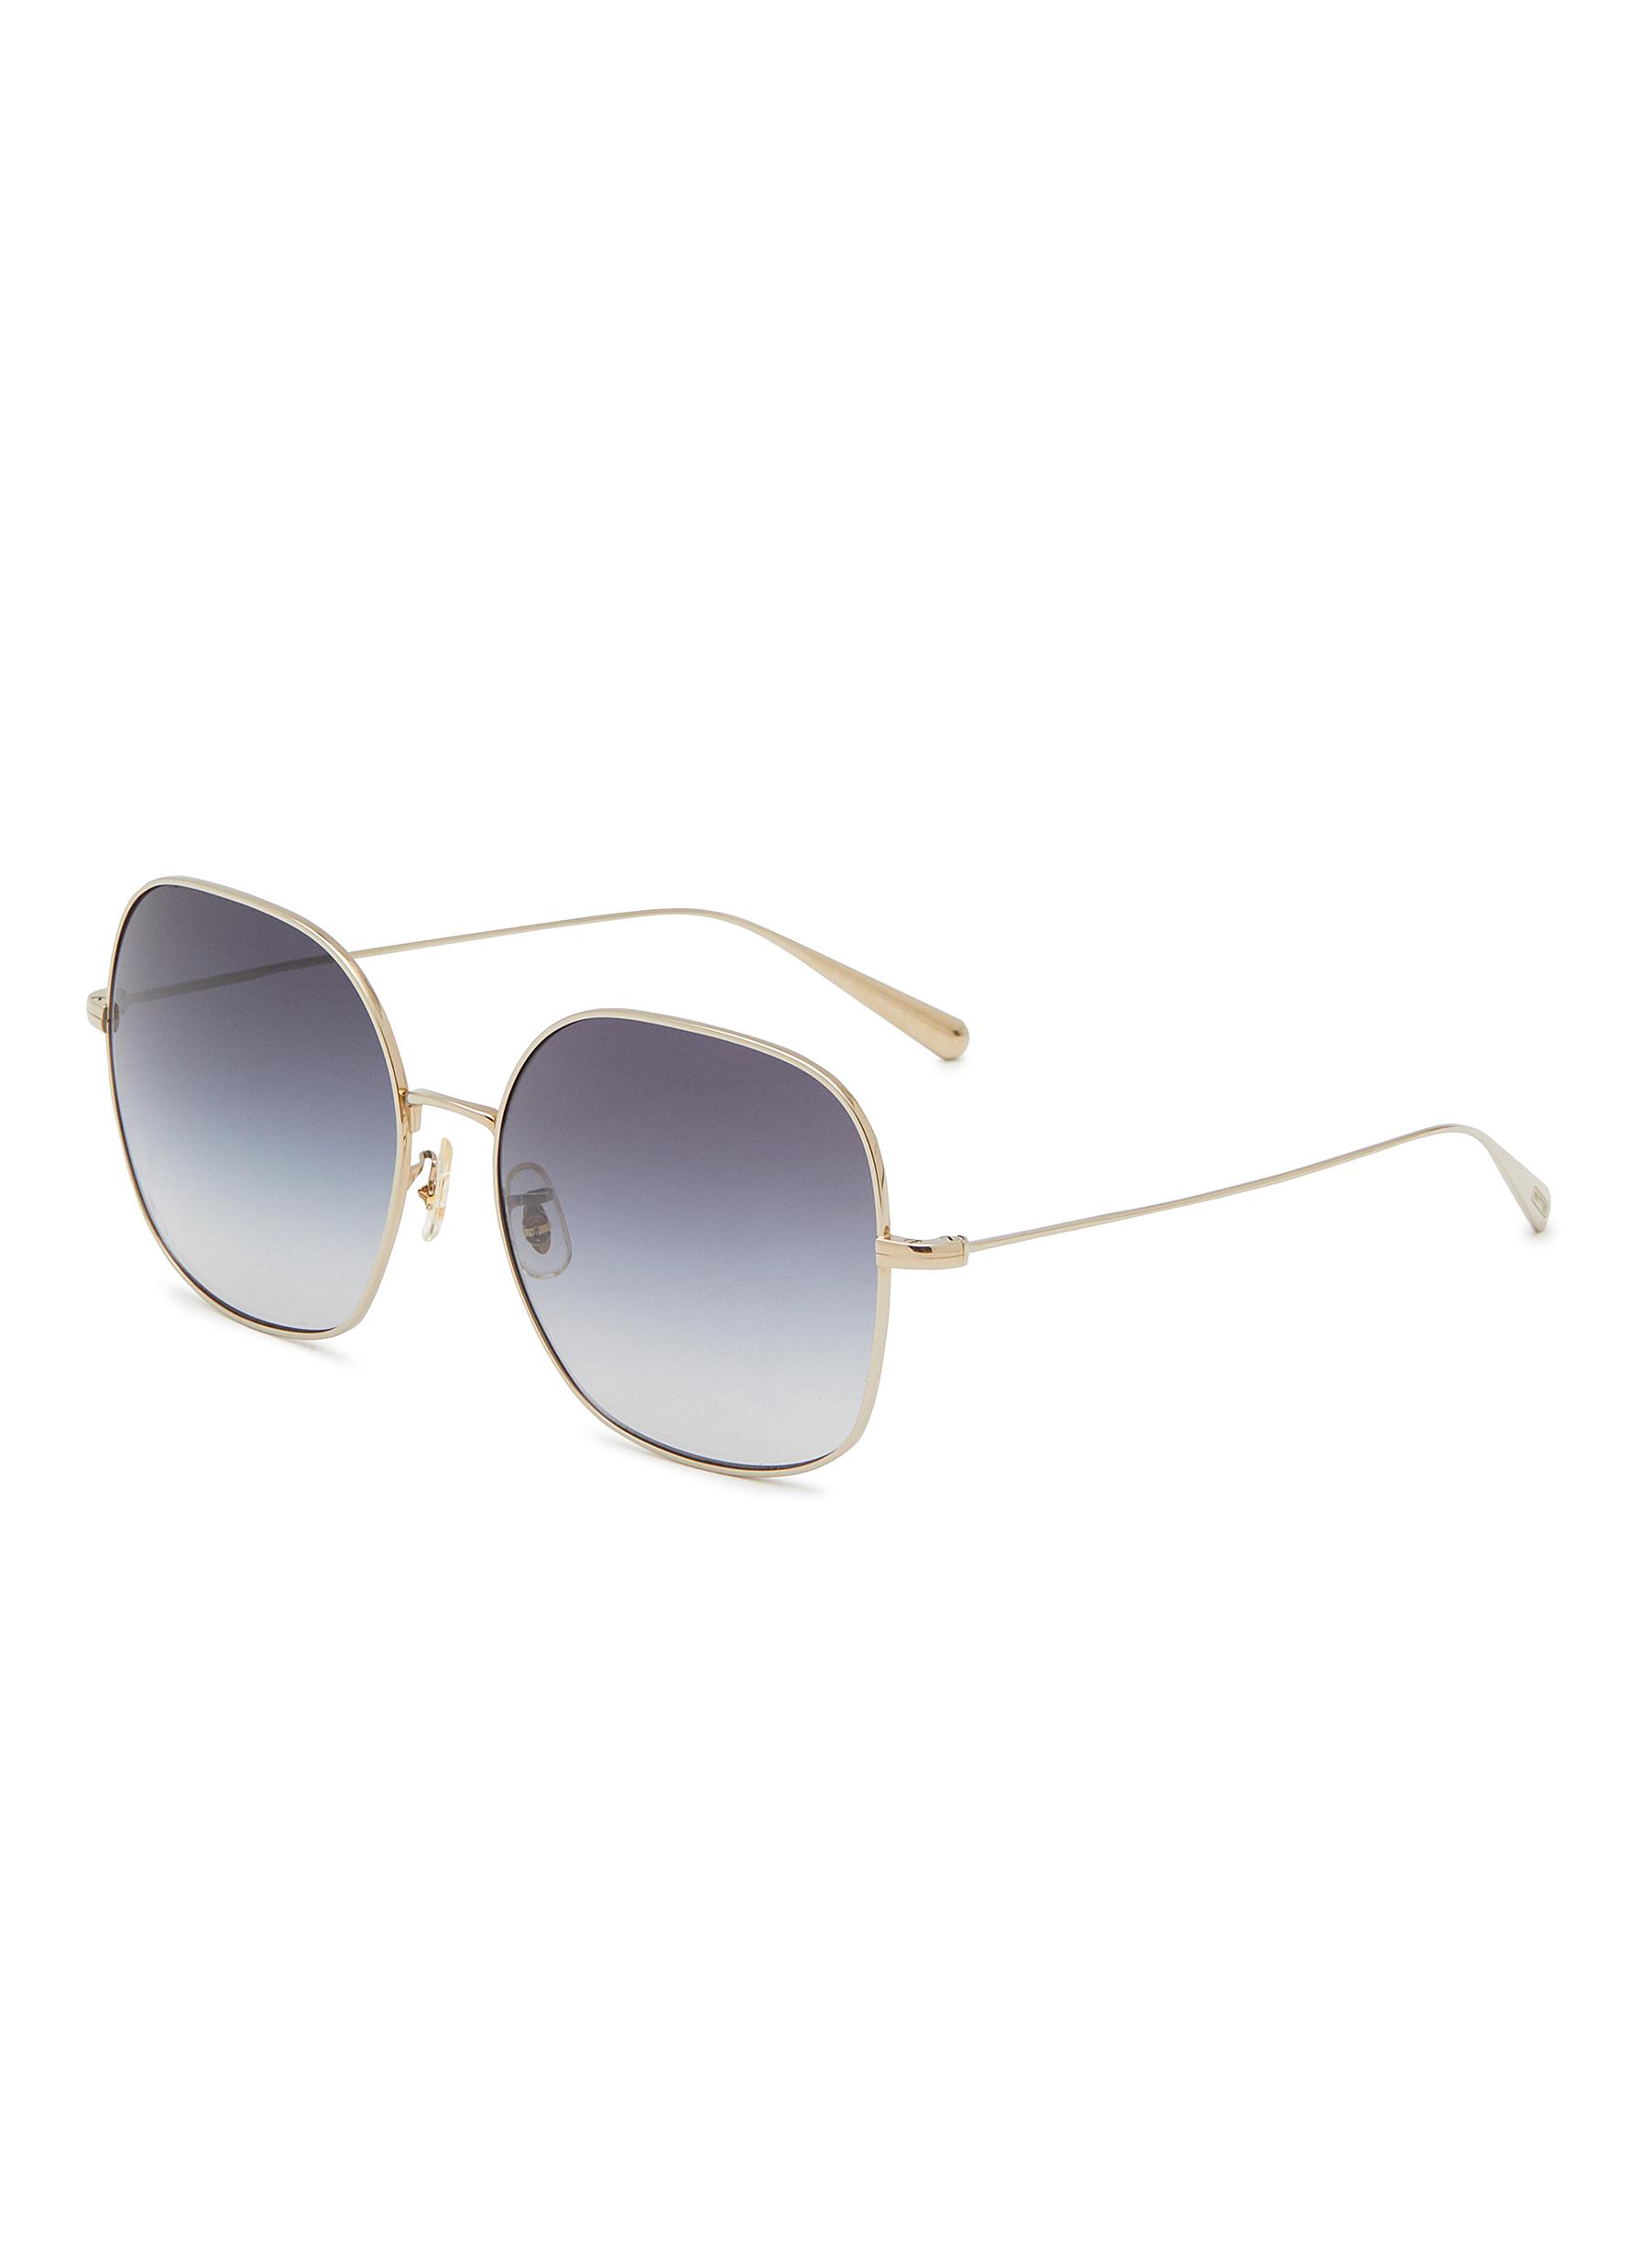 x Oliver Peoples Metal Pillow Sunglasses